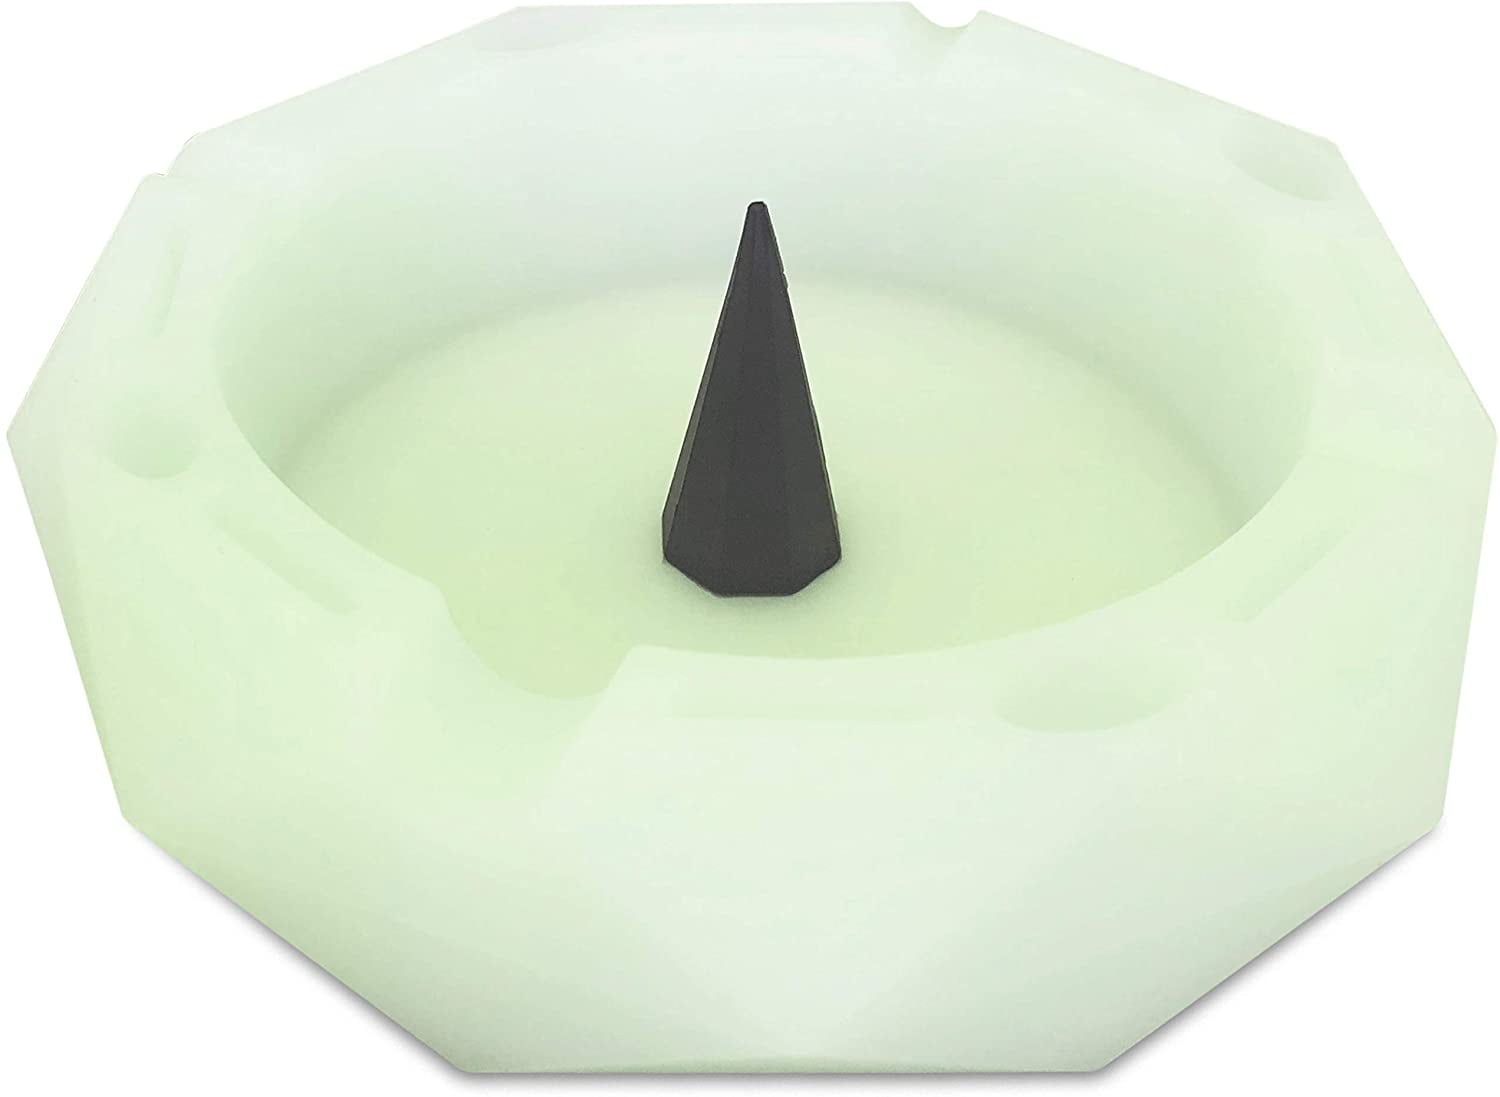 Silicone Round Ashtray Grow In The Dark Heat Resistant Ashtray Container Holder~ 